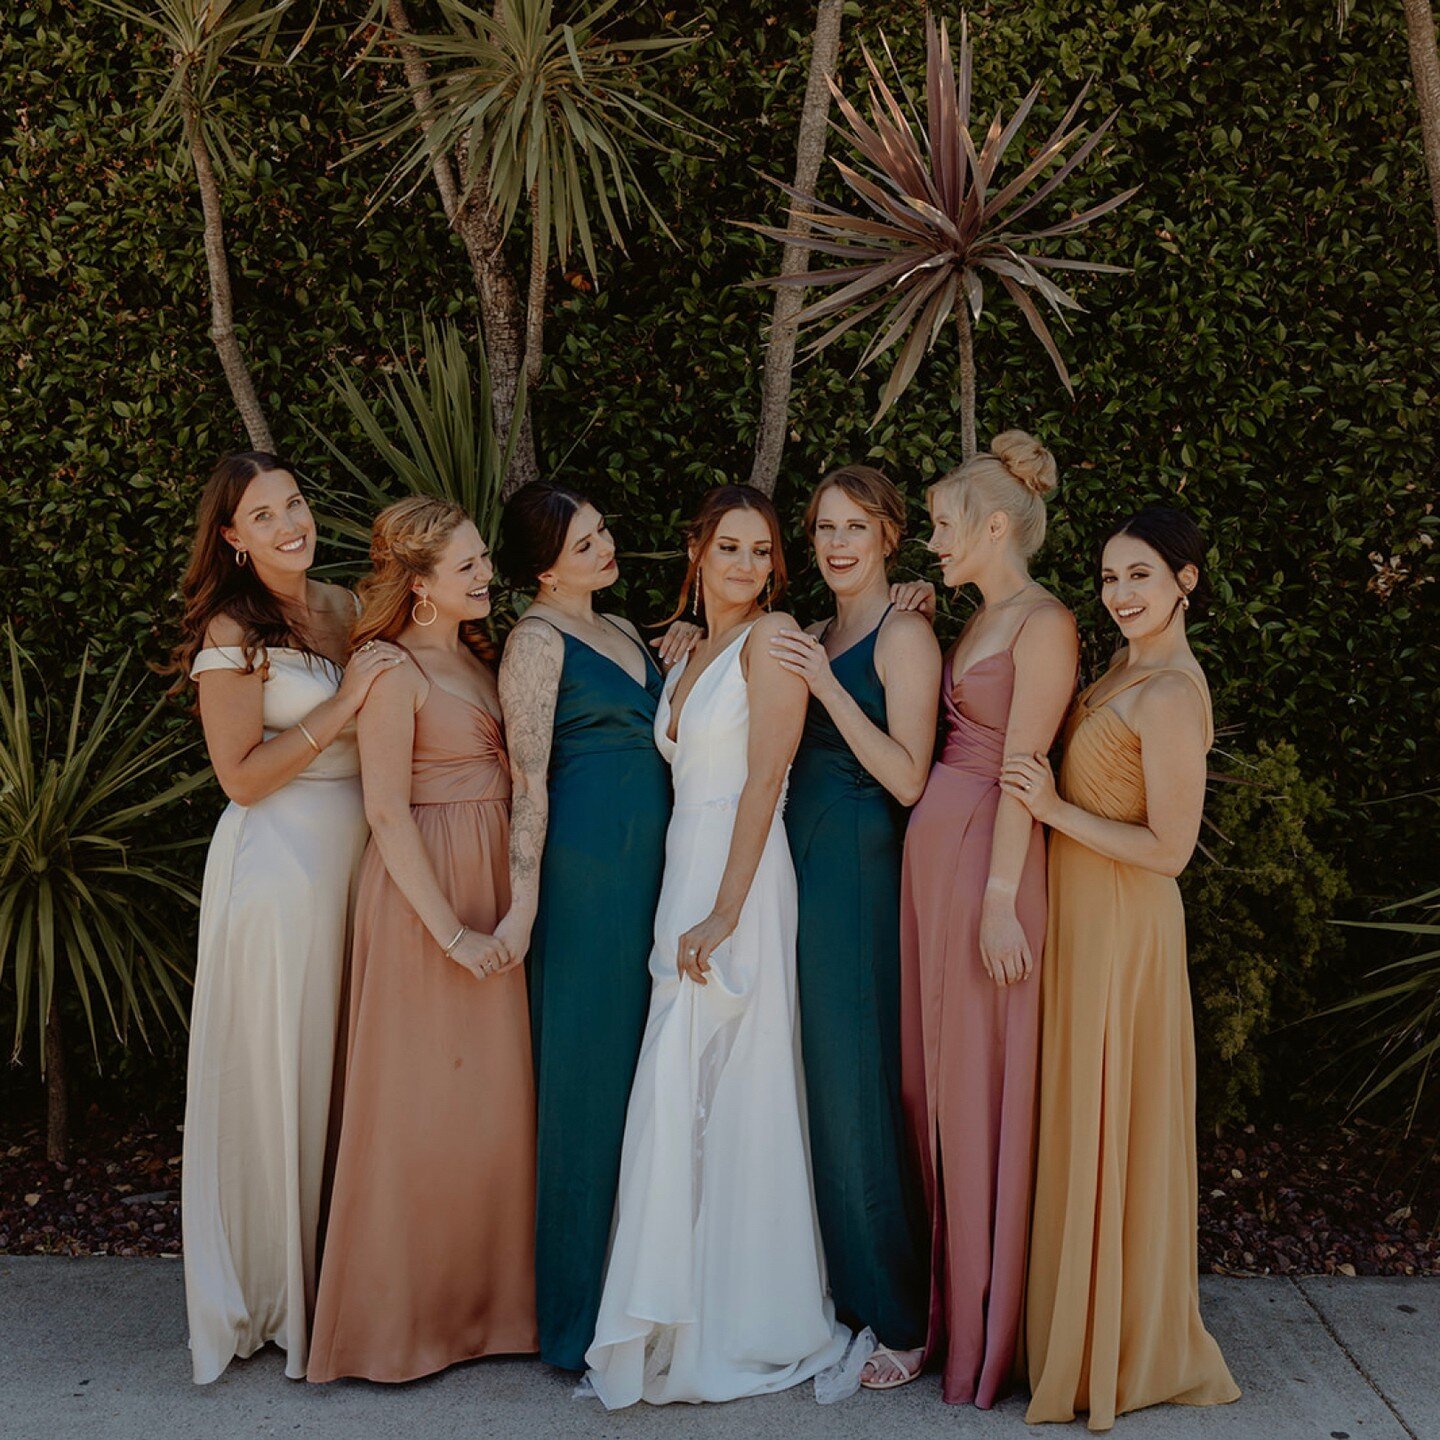 Scroll for some great first look pics with the bridesmaids 😆🥰😂

Planning &amp; Coordination: @TastefulTatters
Venue: @smogshoppe
Photo&amp;Video @staygoldencollective_
Tacos: @mytacoman
Sushi: @yooshicatering
Flowers: @mi_florita
Hair/Makeup: @gla